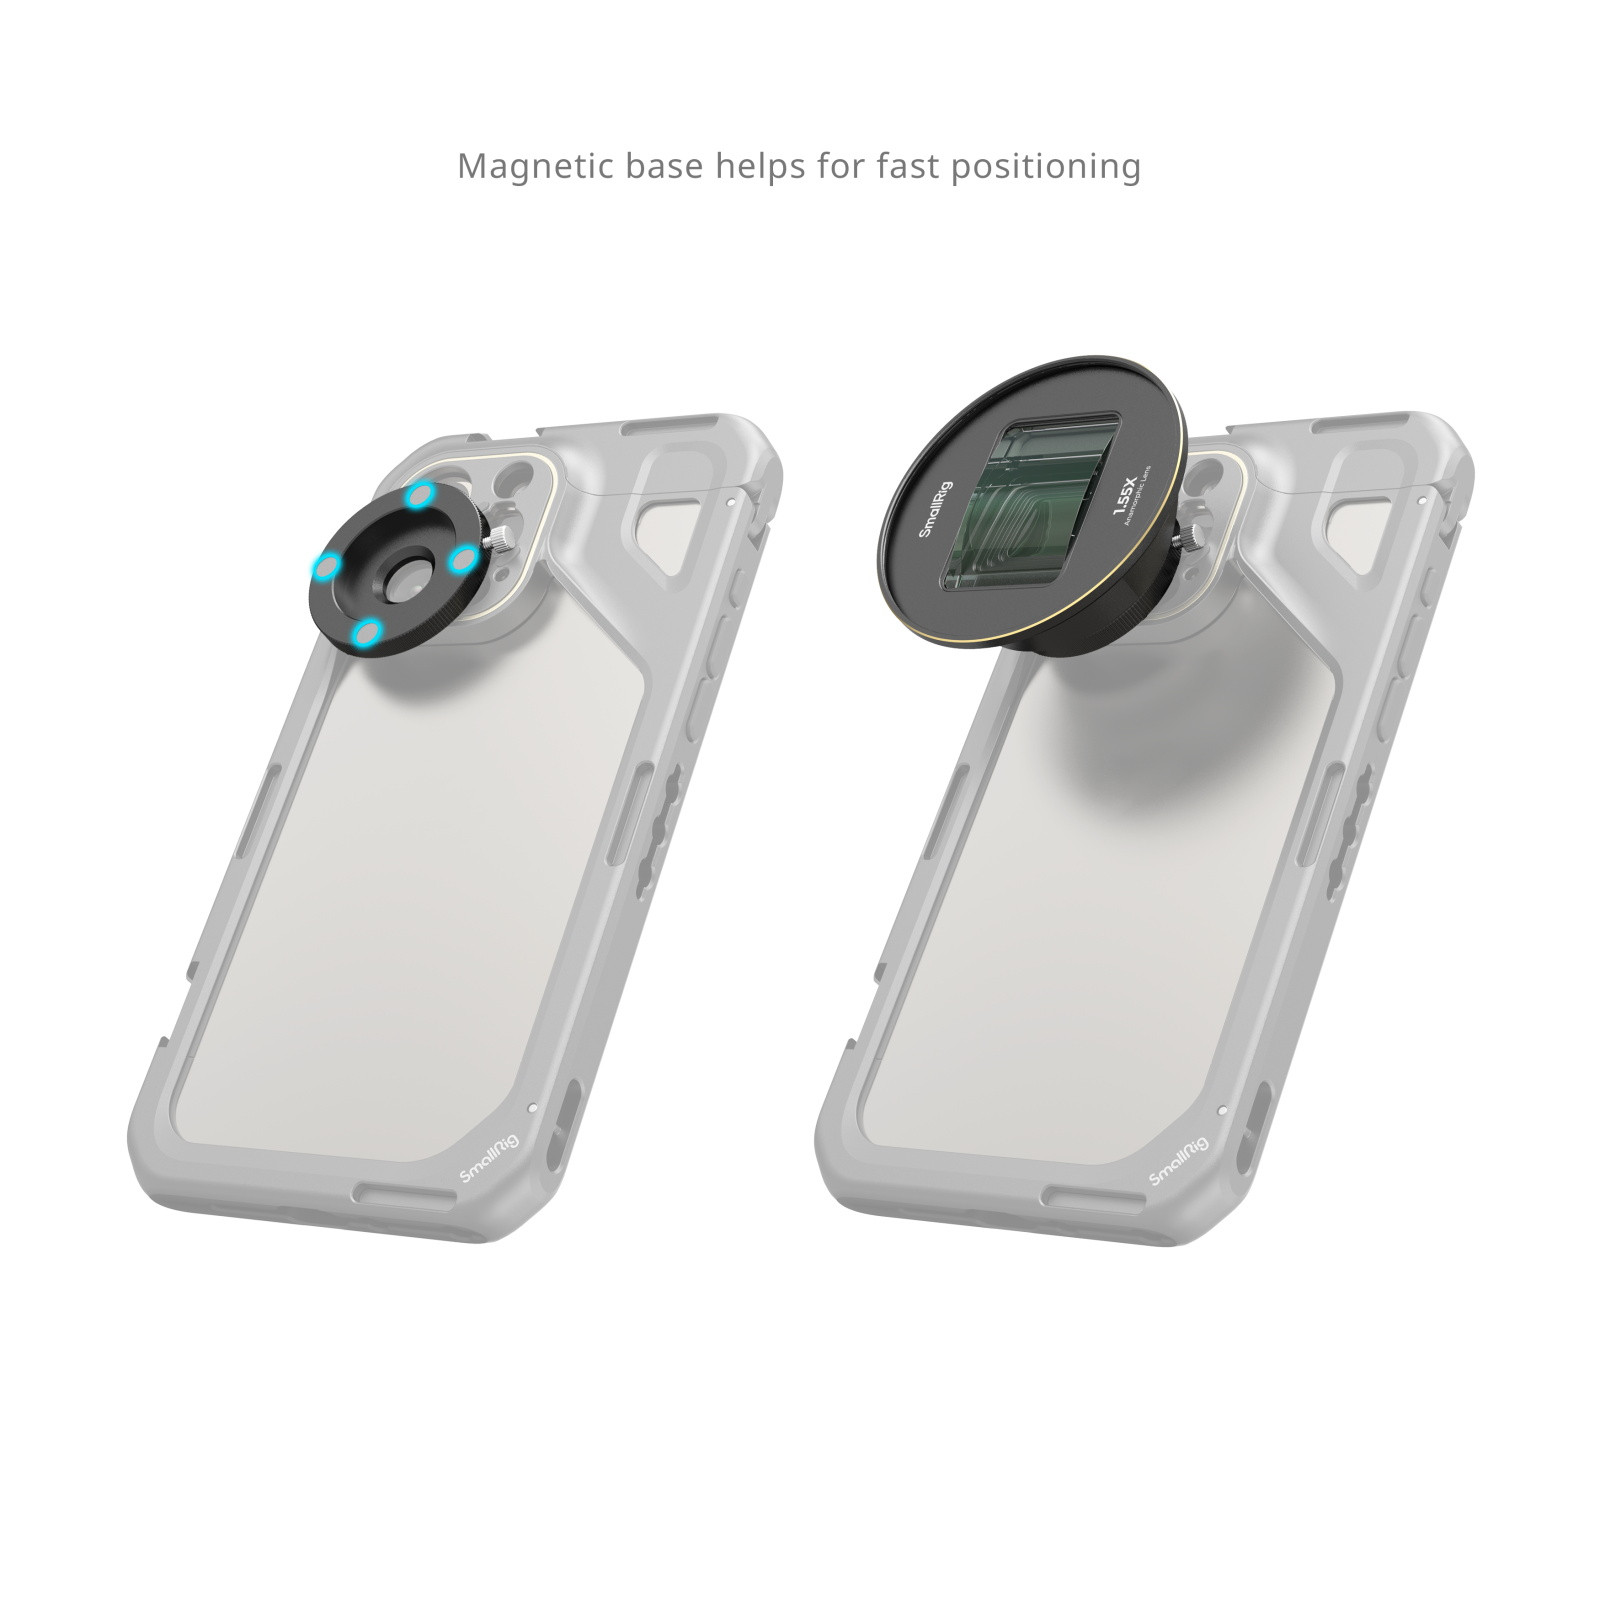 SmallRig 1.55x Anamorphic Lens for Mobile Phone (T-mount) 3578B